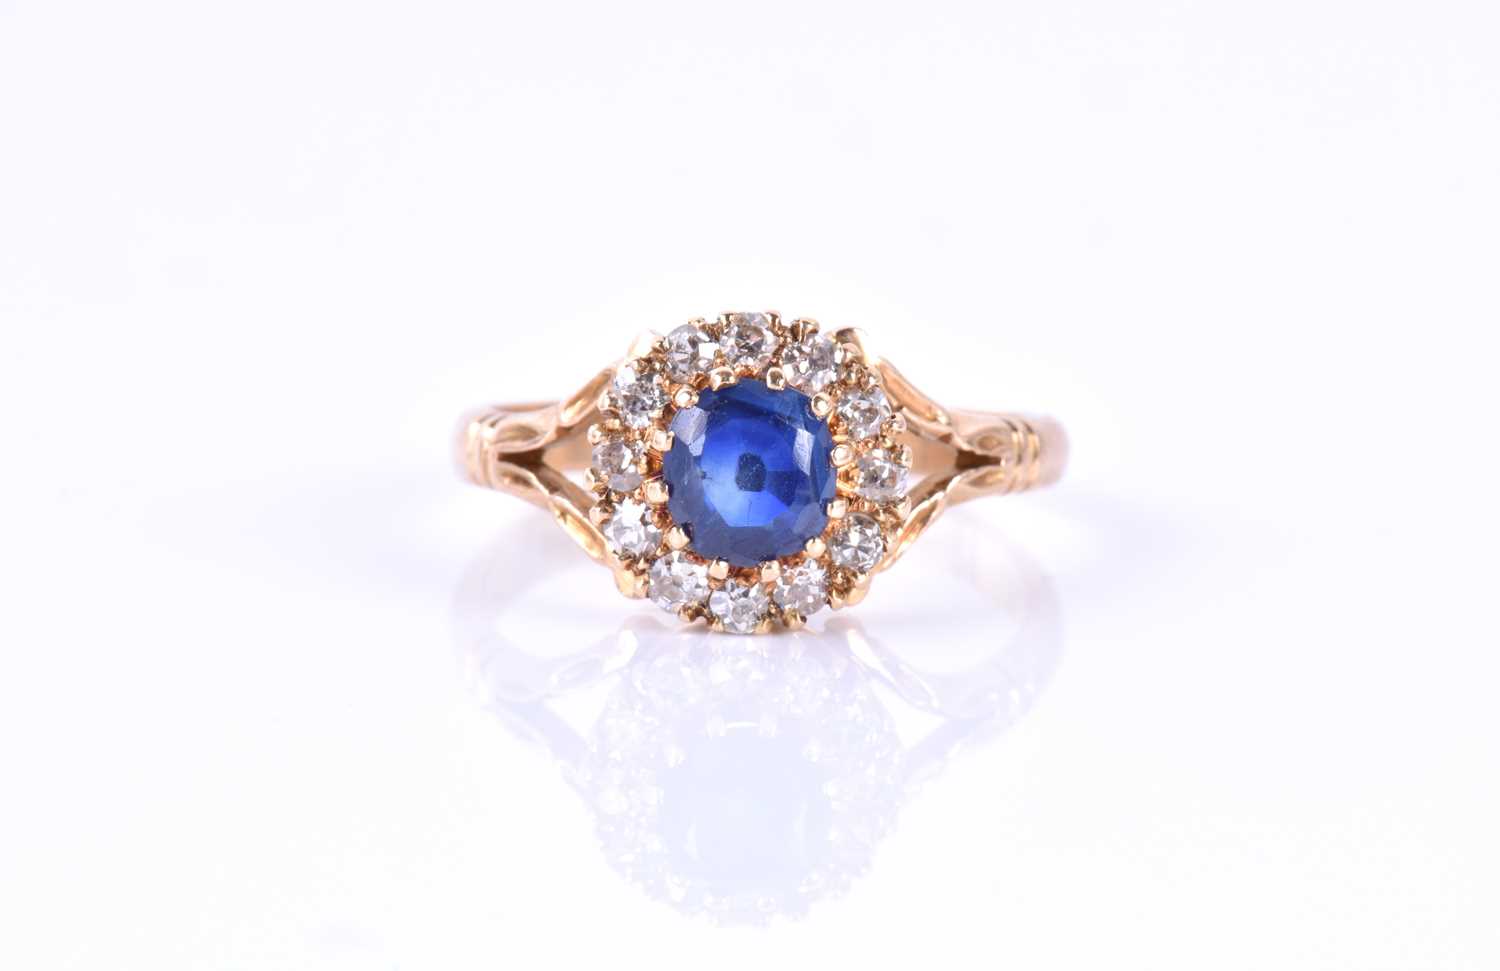 A yellow metal, diamond and sapphire cluster ringset with a mixed round-cut sapphire, measuring